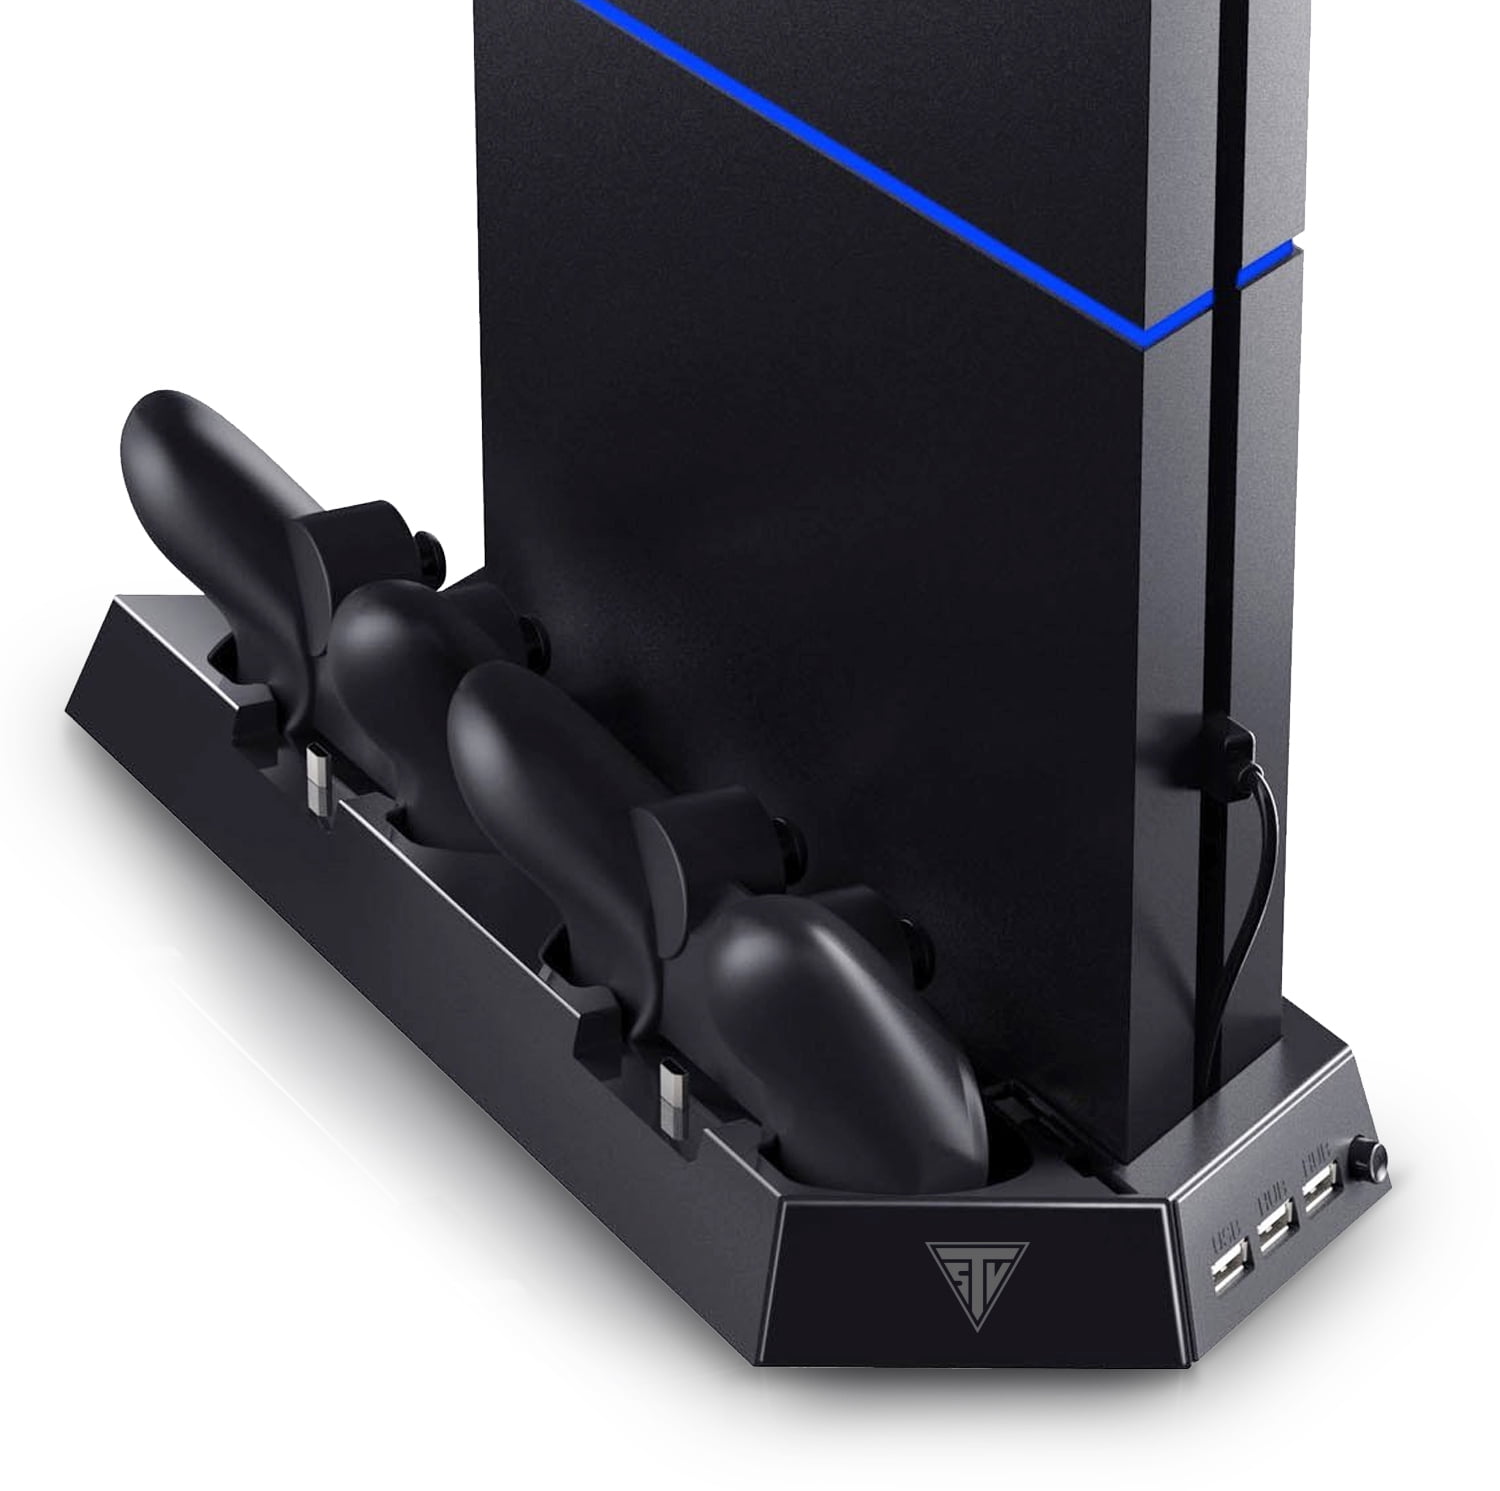 Telemacos ramme Selvforkælelse TSV Cooling Vertical Stand for PS4, Dual Controller Charging Station Fit  for Sony PlayStation 4 Dualshock with 3 USB/Hub, 2 Charging Ports, 2 Cooler  Fans, PS4 Console Accessories, Black - Walmart.com